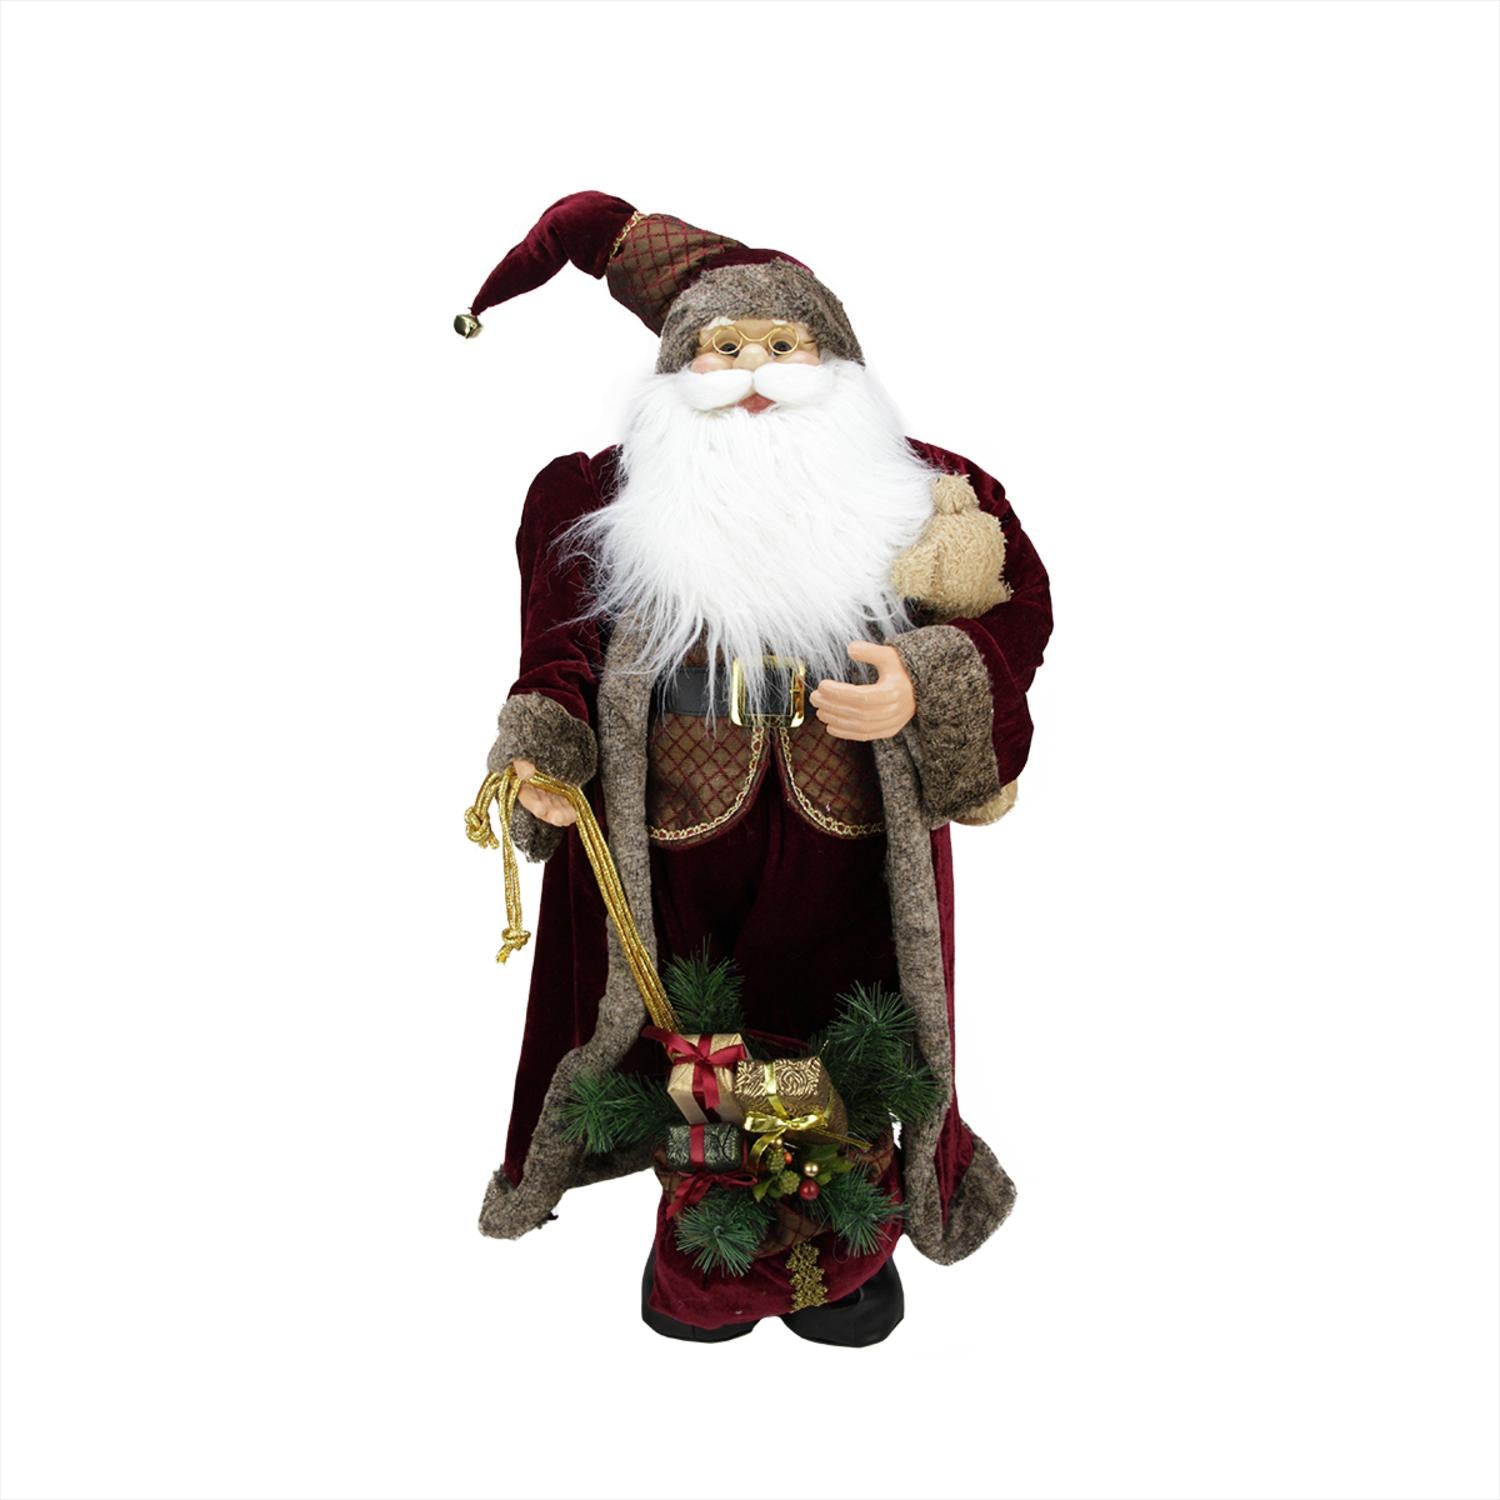 32" Noble Standing Santa Claus in Burgundy Robe Christmas Figure with Teddy Bear and Gift Bag